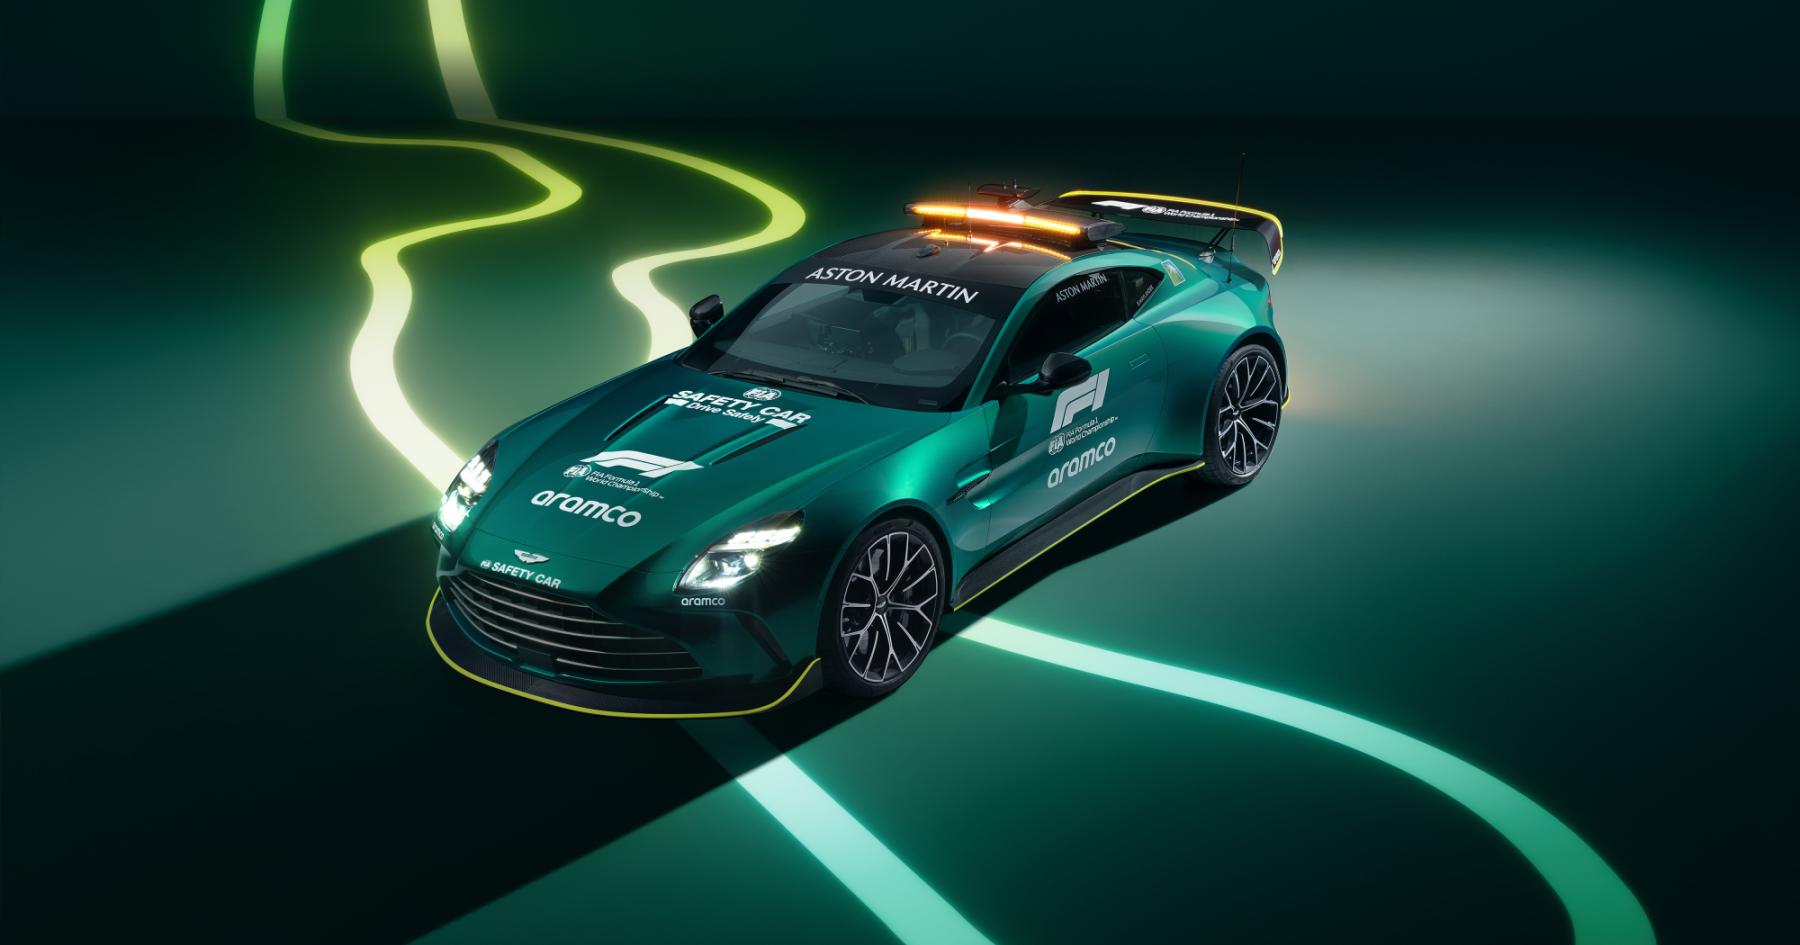 Revolutionizing Safety: Saudi Arabian GP Welcomes State-of-the-Art Safety Car Upgrade